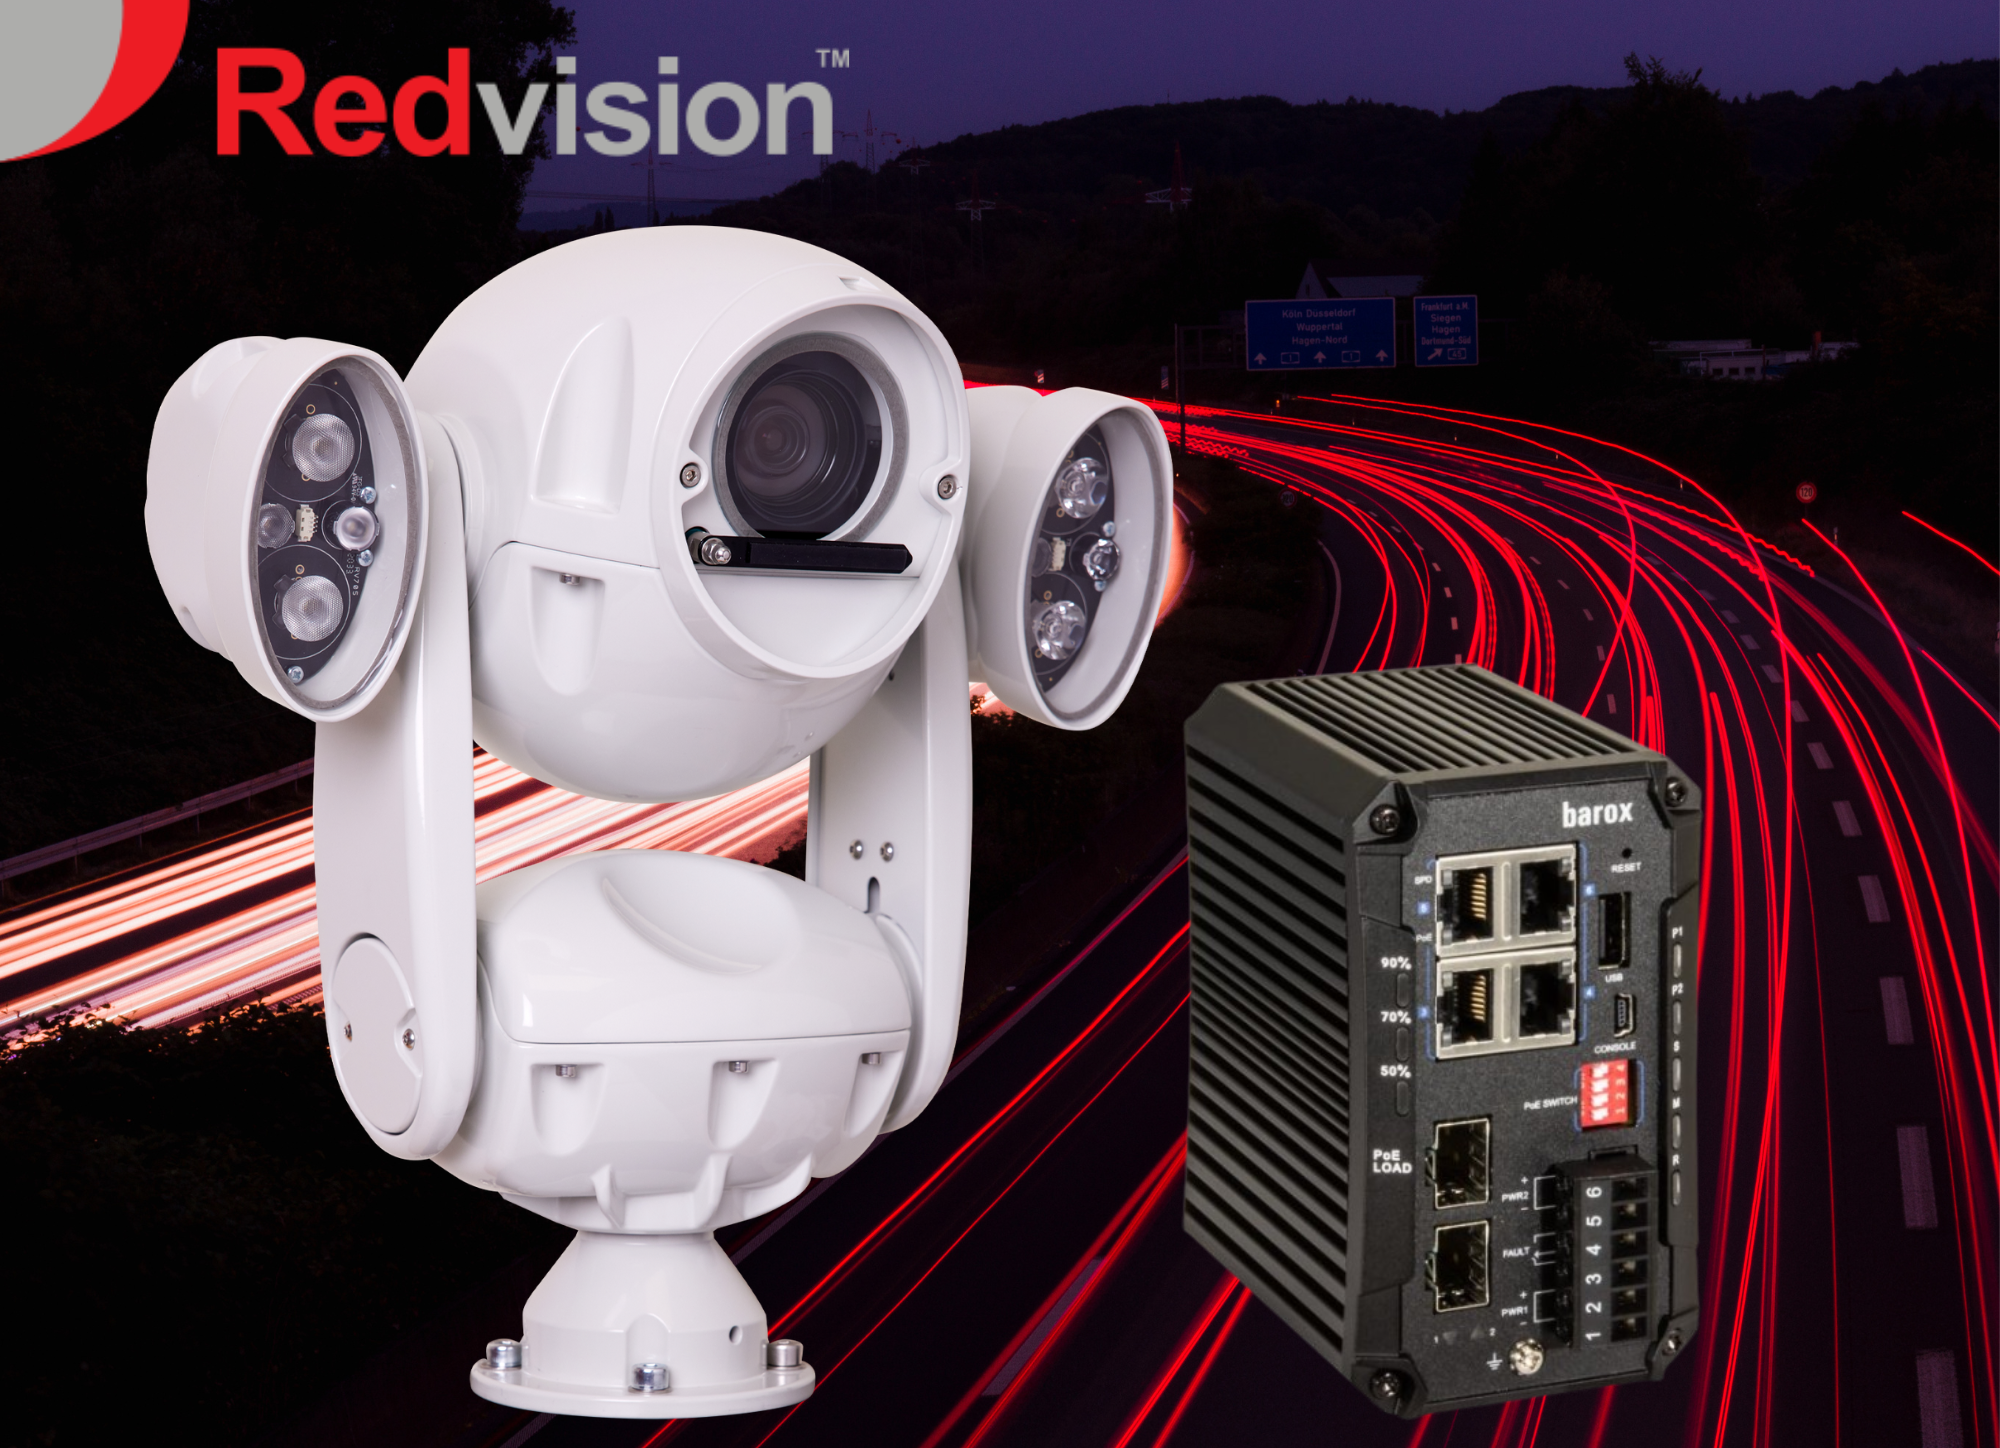 barox Ethernet PoE switches approved to power Redvision X4 COMMANDER™ PTZ camera